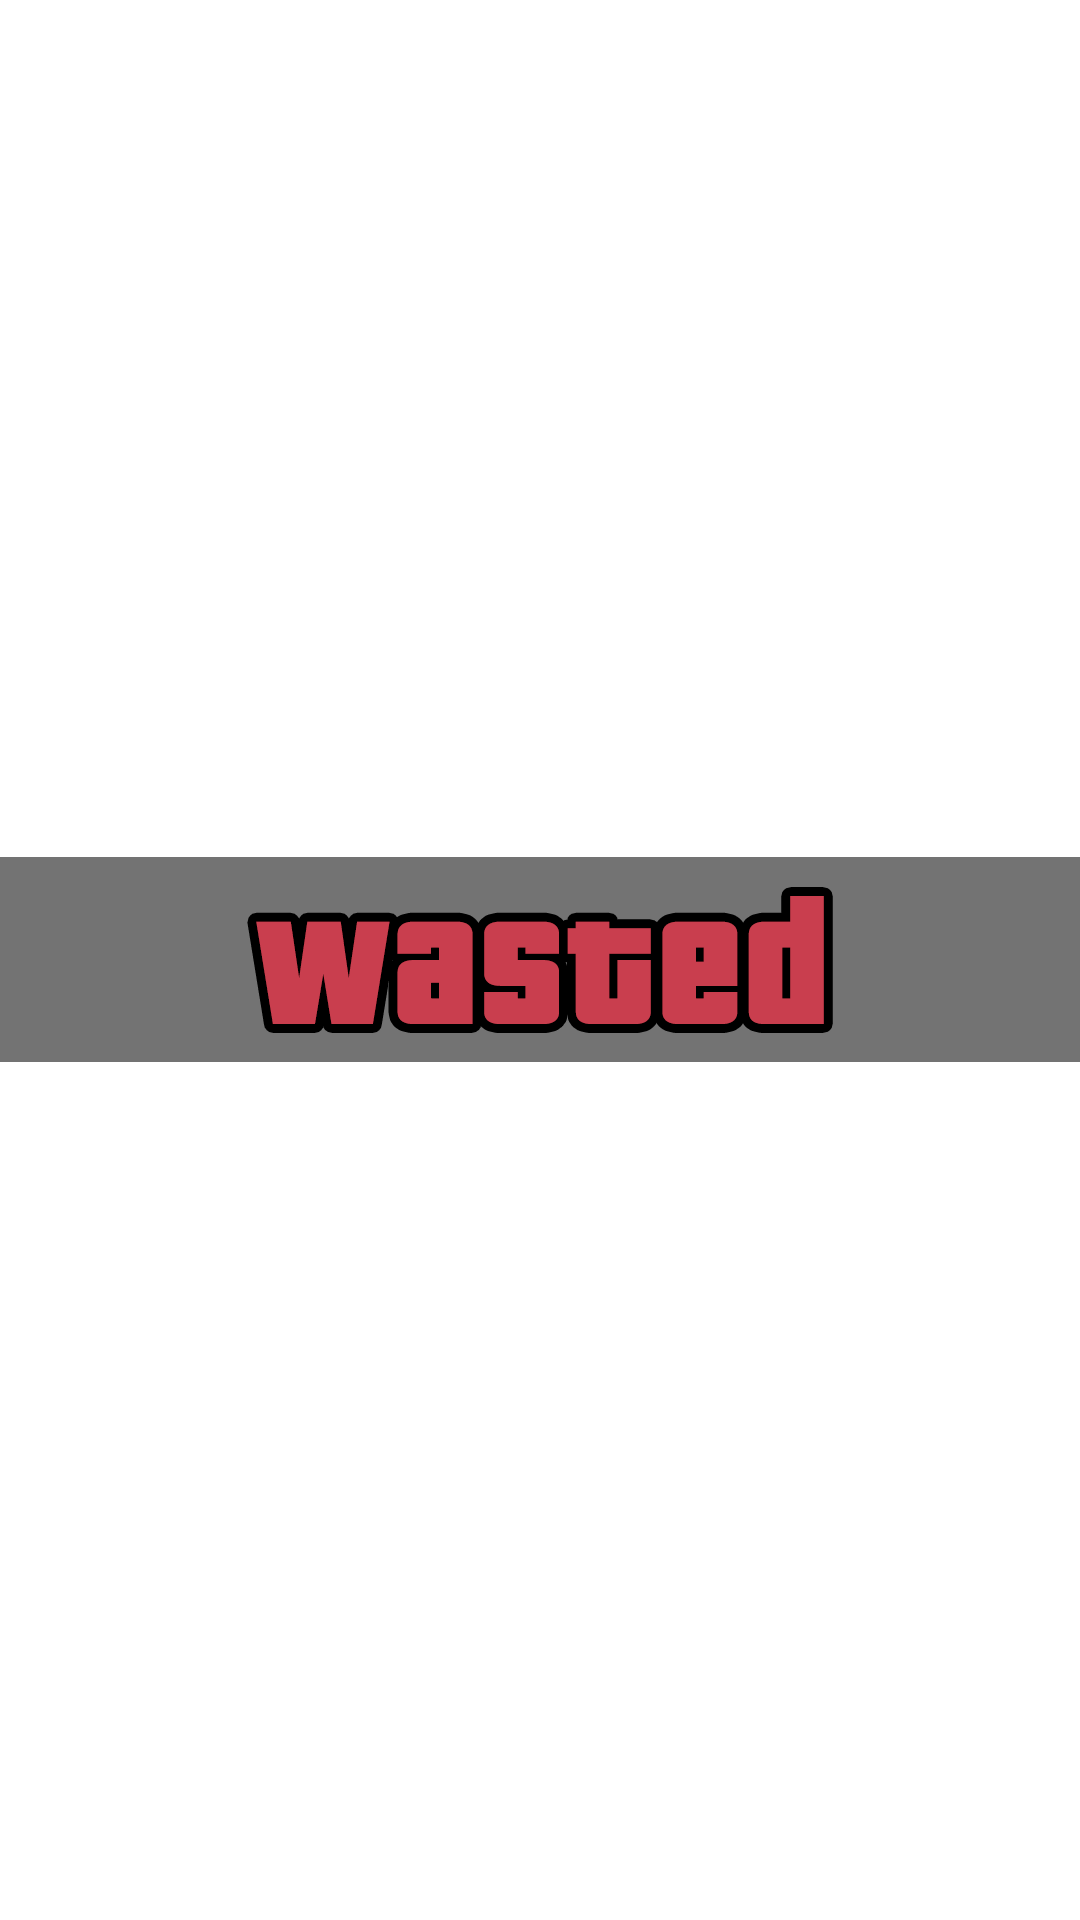 Gta Wasted Png posted by John Sellers.